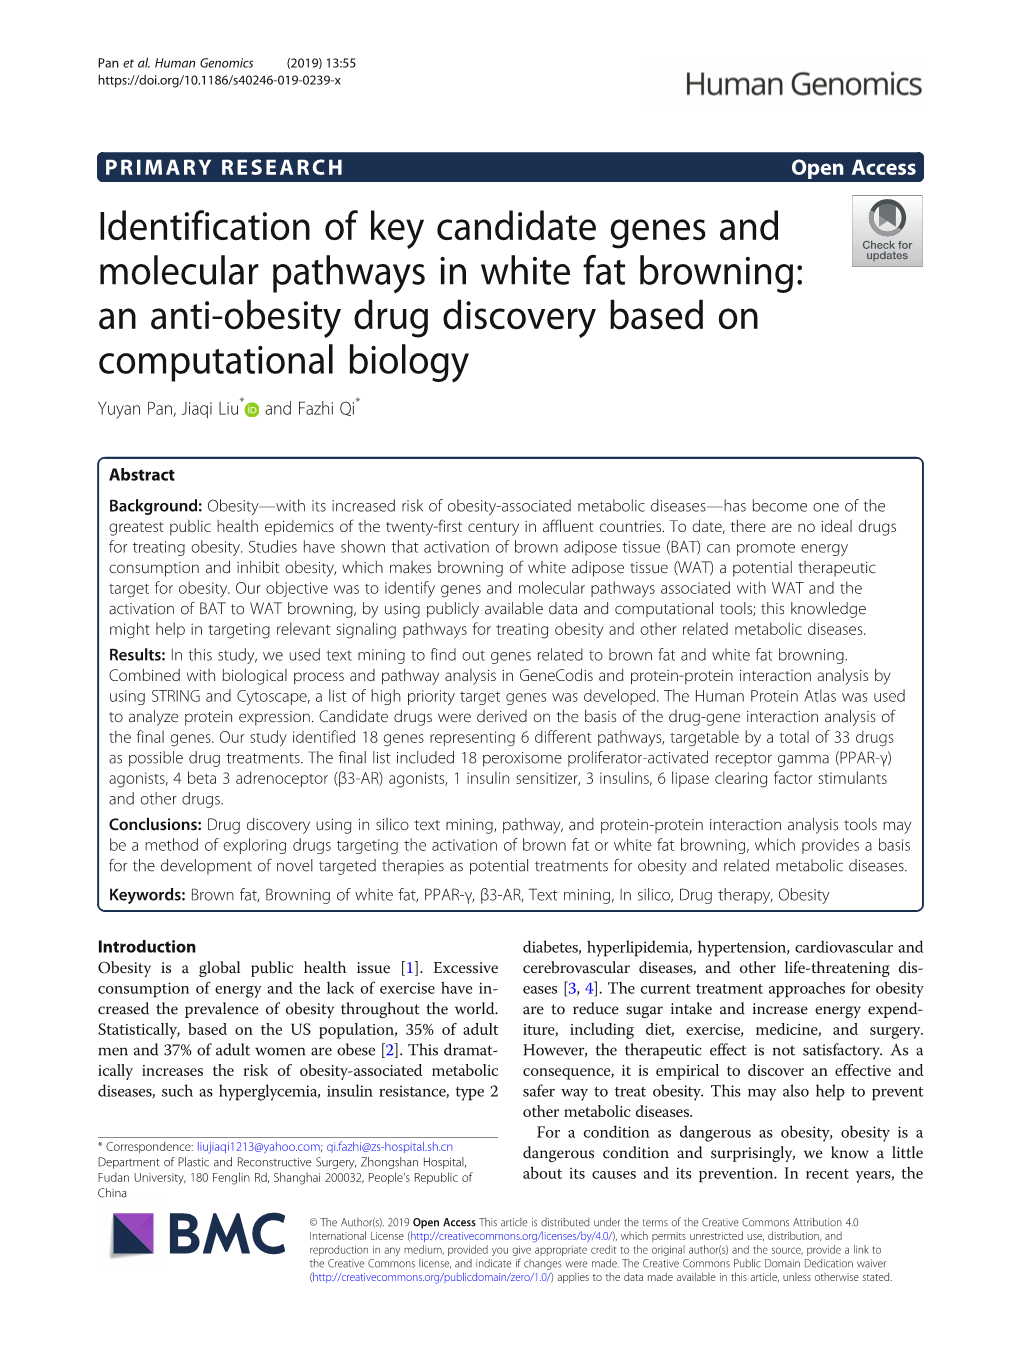 Identification of Key Candidate Genes and Molecular Pathways in White Fat